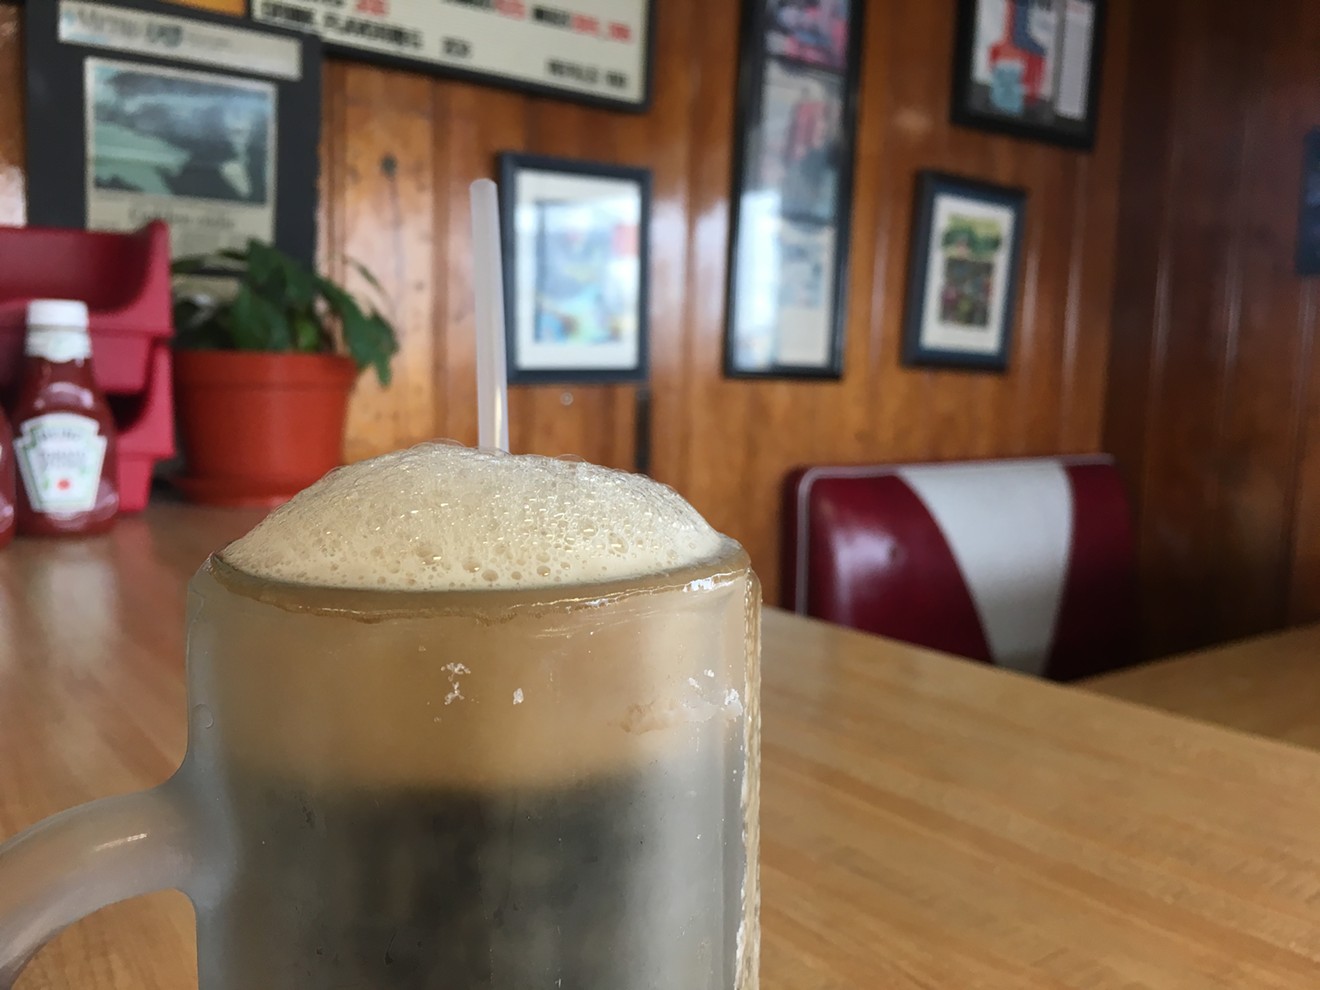 The frothy root beer at Dairy-Ette.